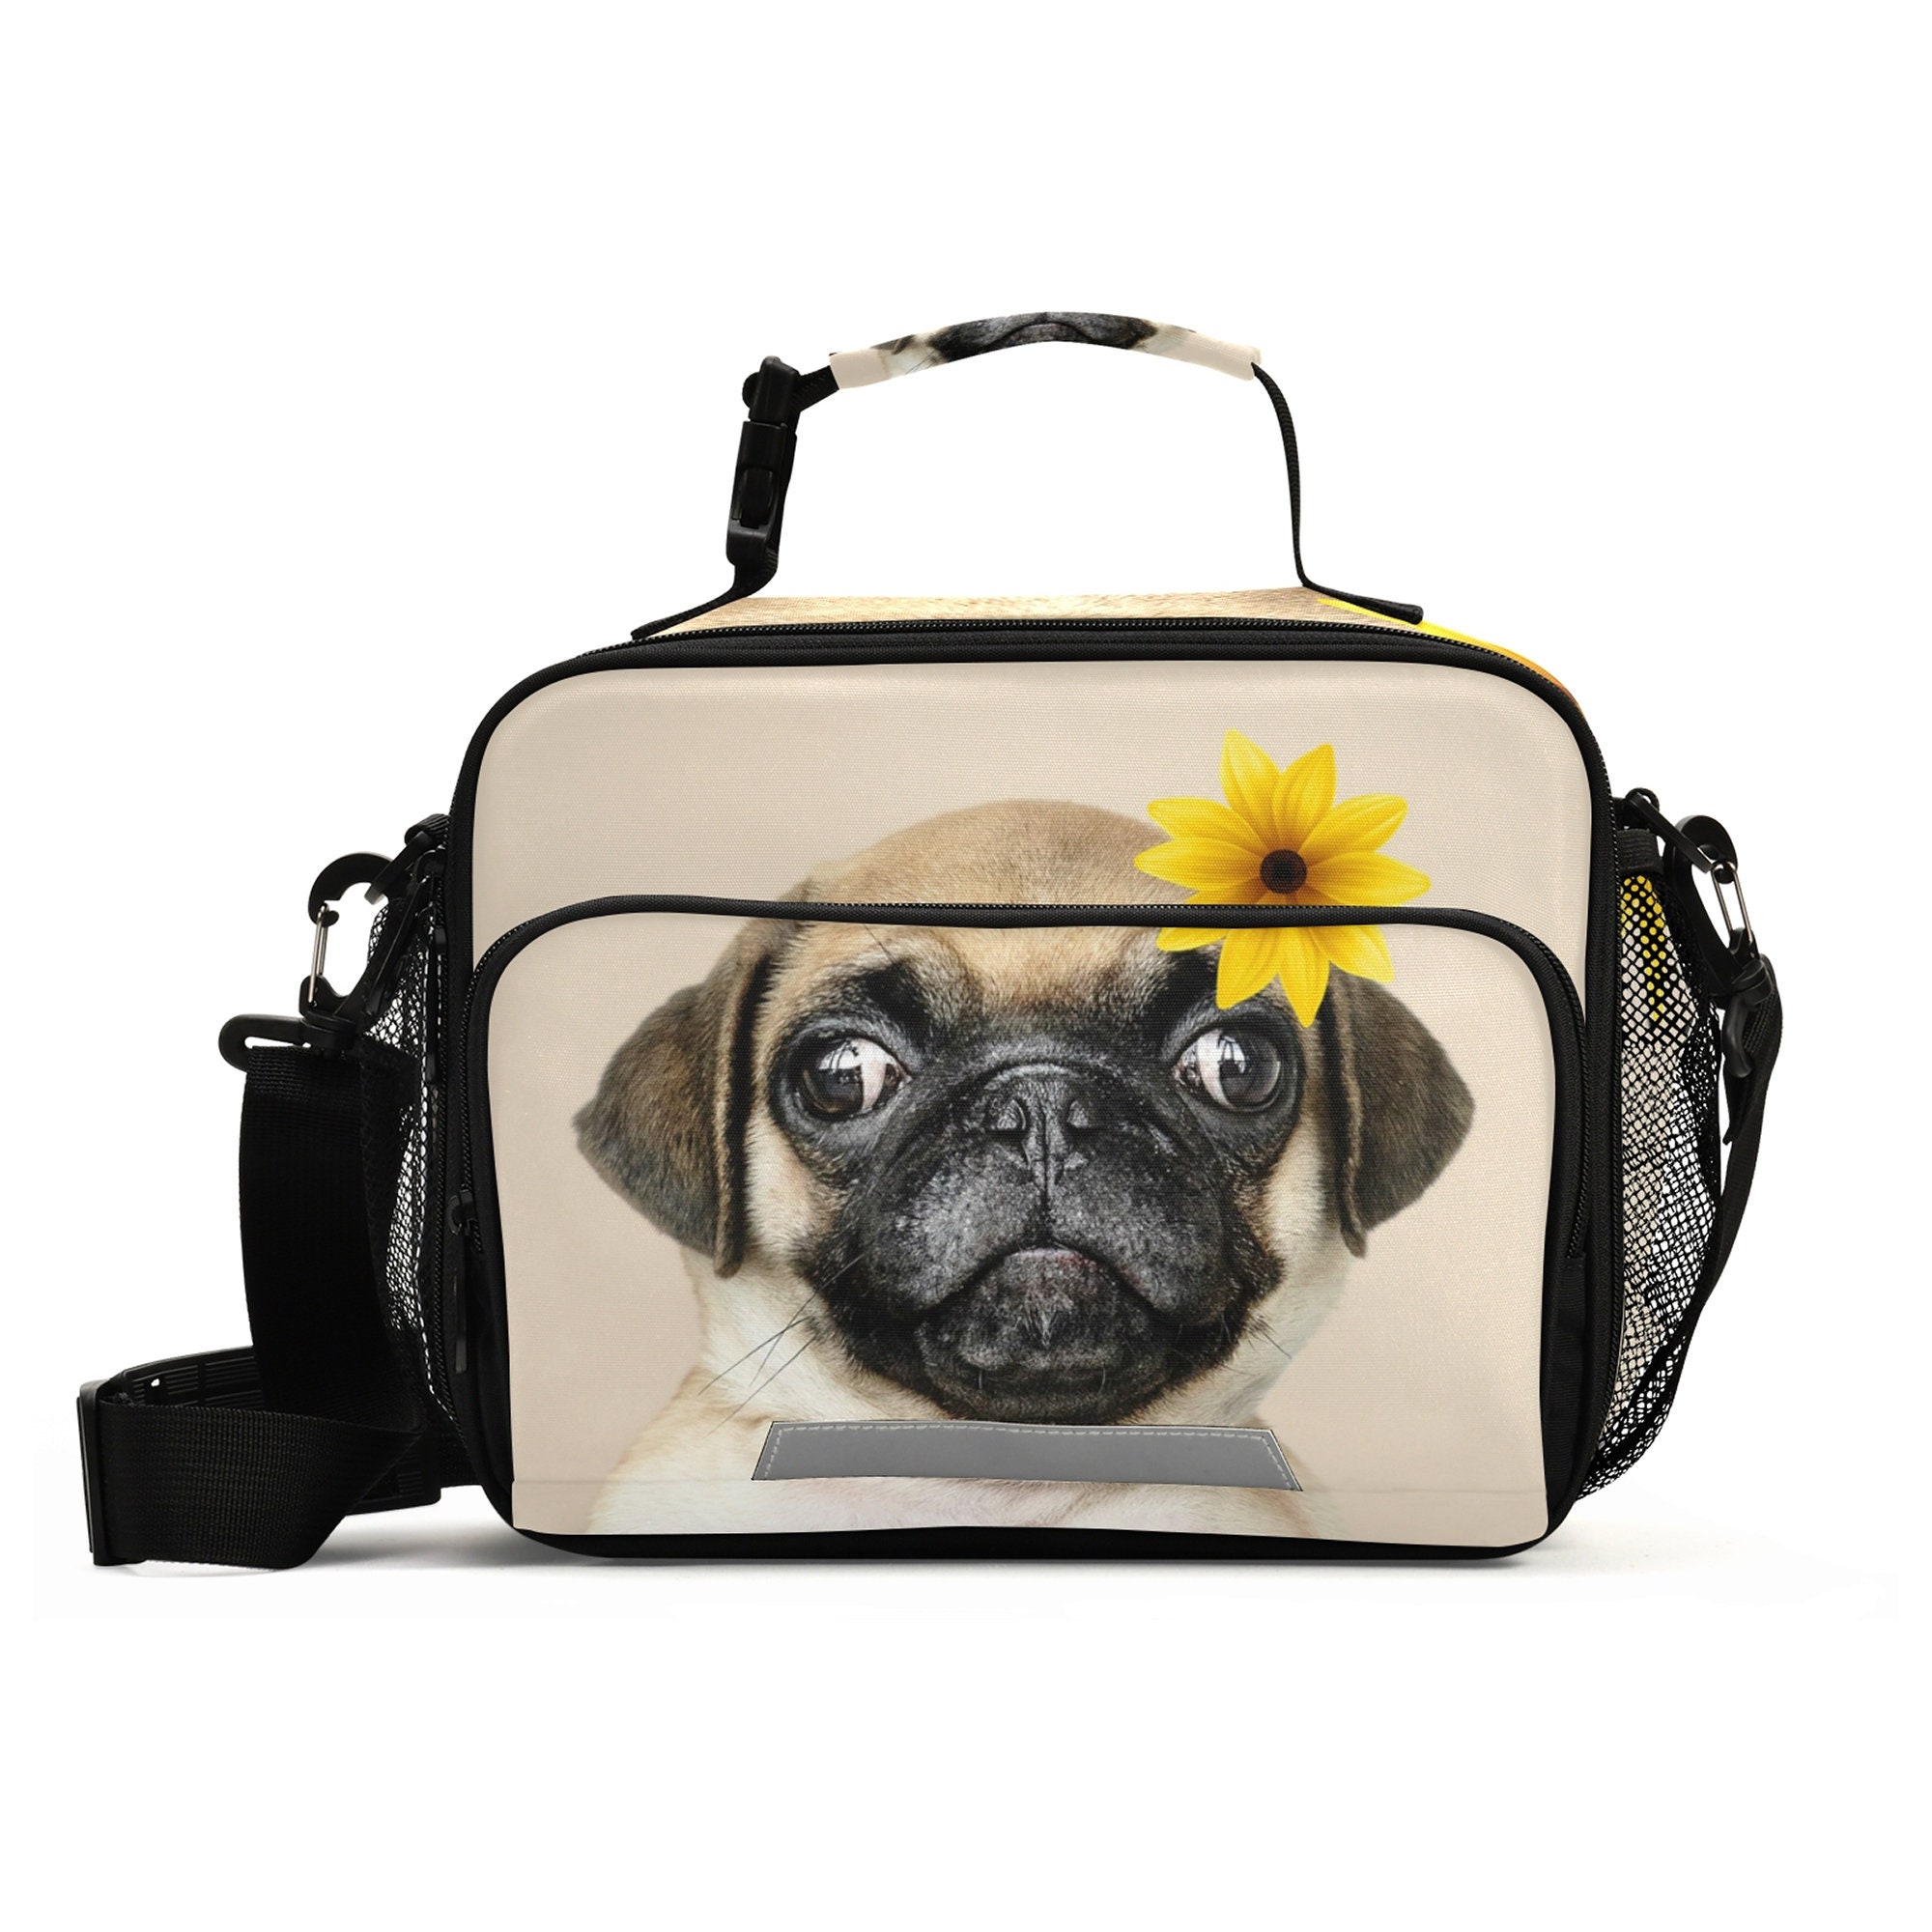 Cute Pug Dog Bento Bag, Ice Pack Multifunctional Outdoor Picnic Bag, Lunch  Bag, Waterproof Bag, Lunch Box Bag, Hand Wash, Insulated Lunch Container  Picnic Bag For Teenagers And Workers At School, Classroom